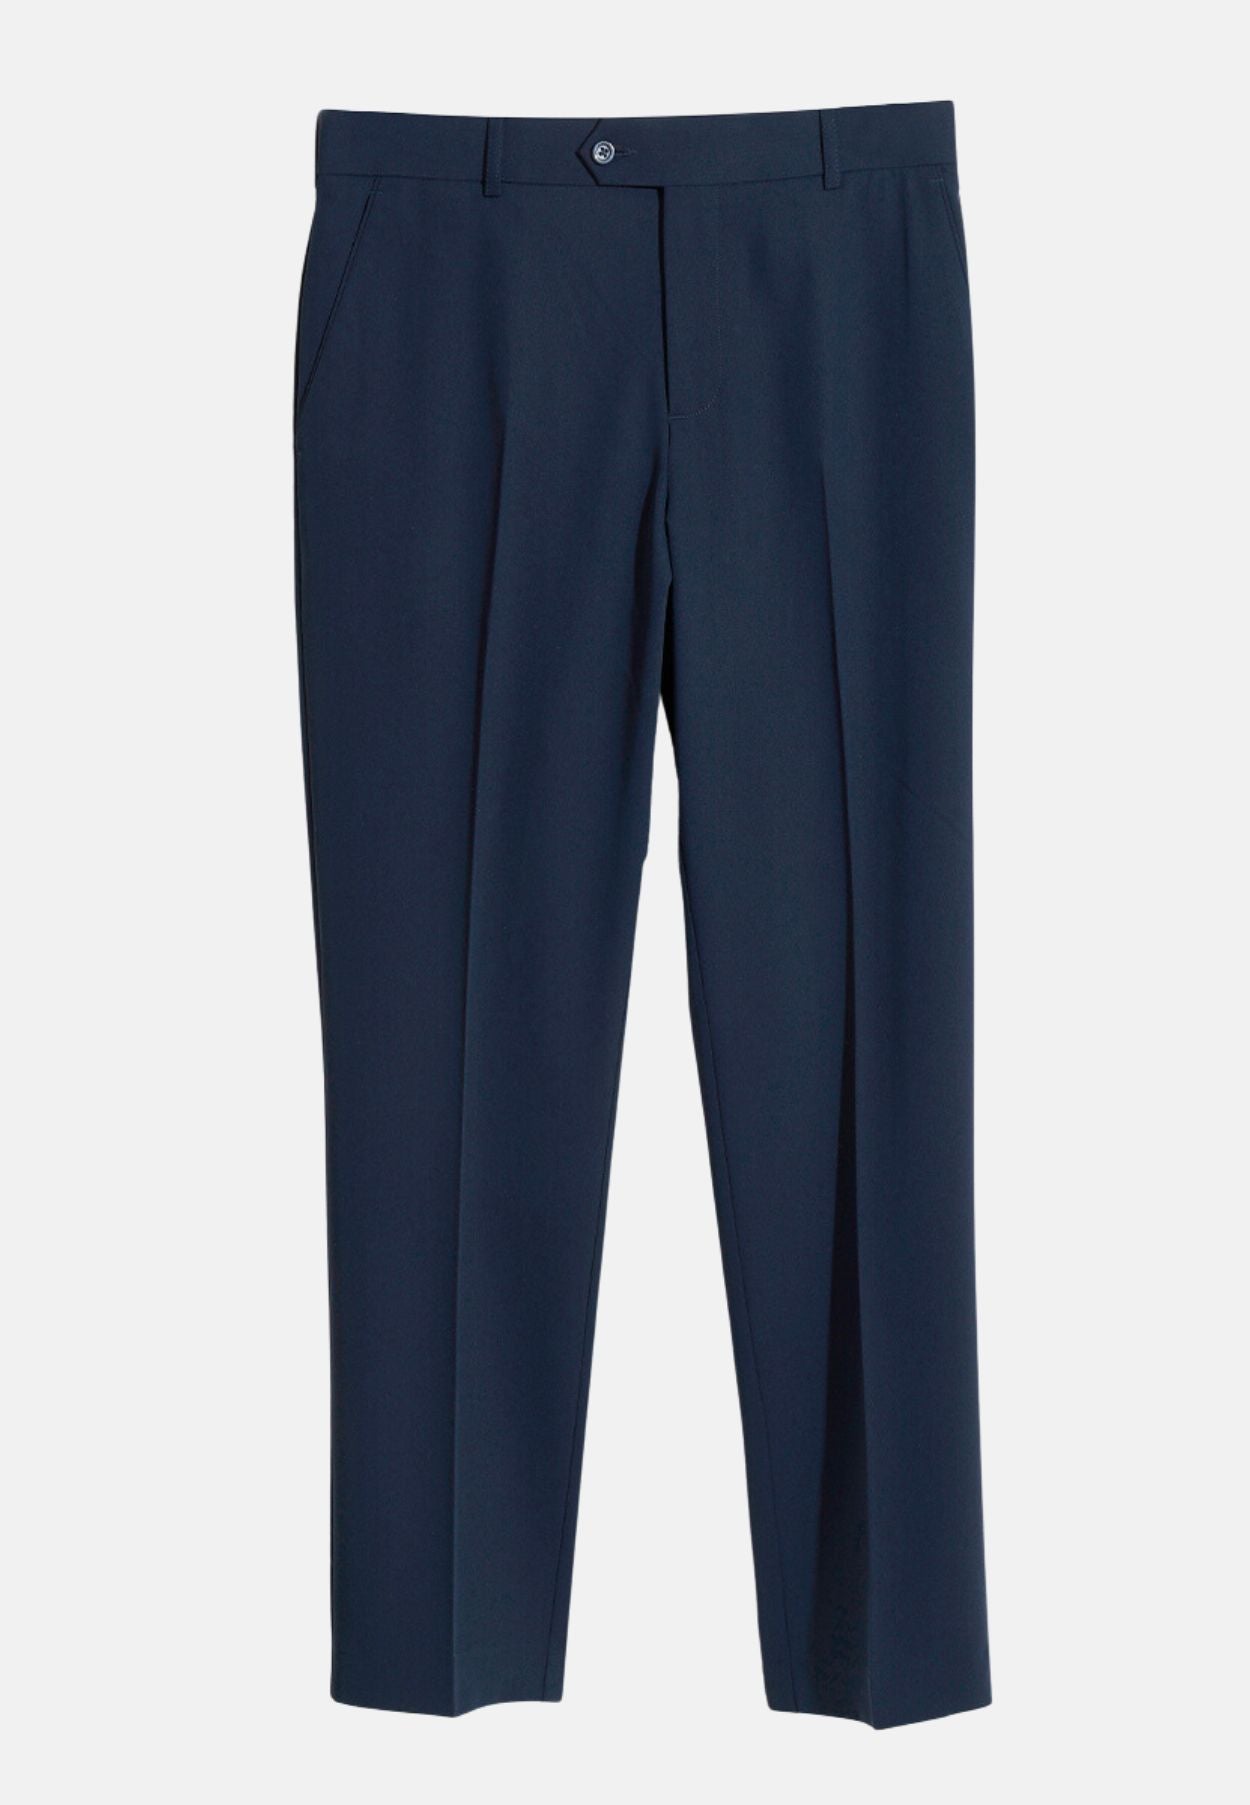 FarahRoachman4 WayStretchTrousers Navy